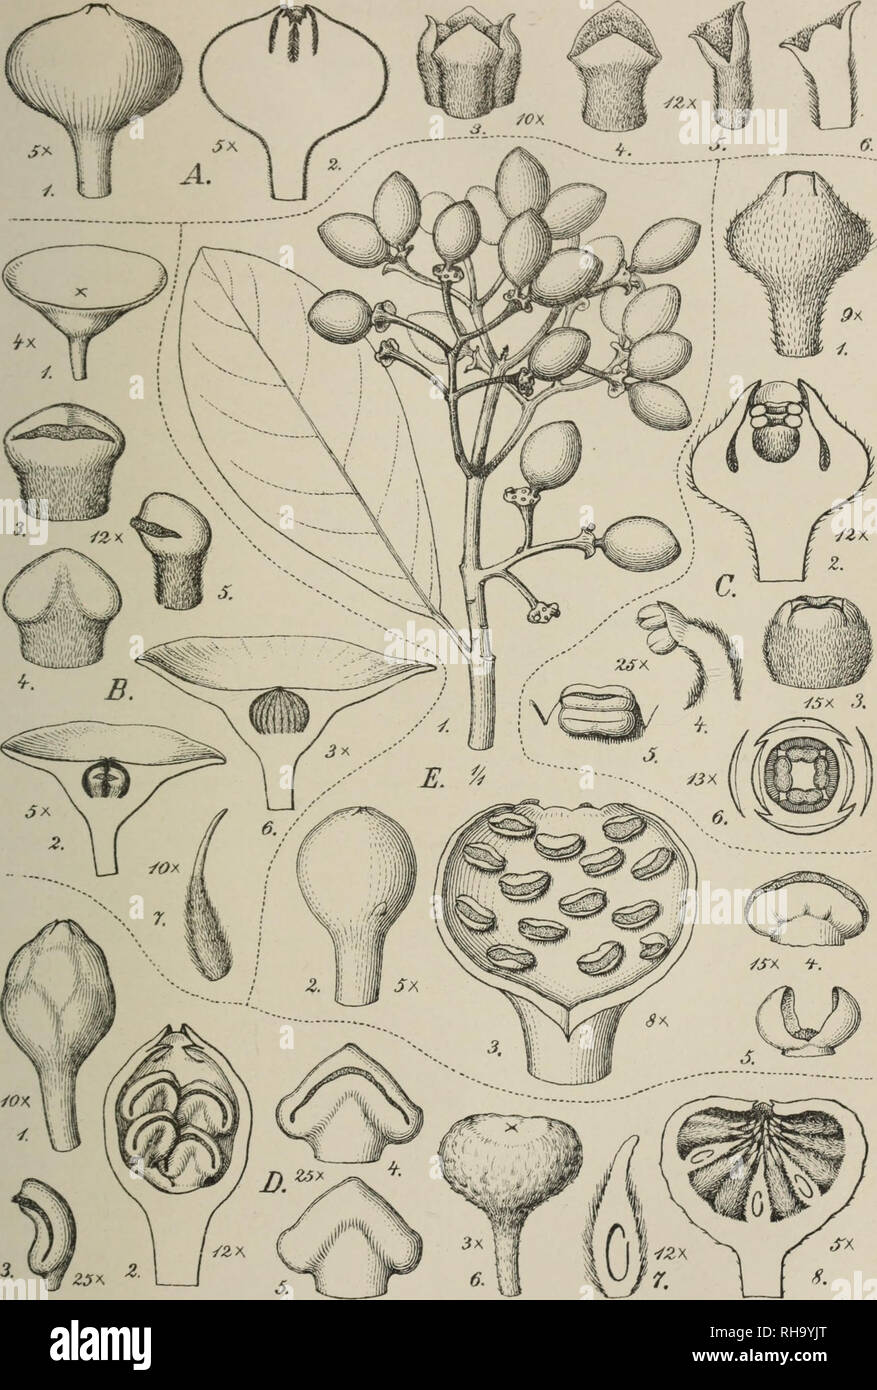 . Botanische JahrbuÌcher fuÌr Systematik, Pflanzengeschichte und Pflanzengeographie. Botany; Plantengeografie; Paleobotanie; Taxonomie; Pflanzen. Engler: Bot Jahrb.. VATBd. Tai: II.. A. SfeÃ§raniherÃ ^ ihyrsiflora Buk.Ã.AnihohQmhix hospituns (Becc.)Pcrk., C.Tetrasynandm laxifhra (Bmtk)Ferk., R Wilkiea macrophvUa (A. Cunii.) A.DC, W.Wardellii (F.vM.)Perk. Yerlag v.Wilhelm Engeln)ami,LÃ§ipy.ia. Lifti AnstJuiiub Kiinkhardt Leipzig.. Please note that these images are extracted from scanned page images that may have been digitally enhanced for readability - coloration and appearance of these illust Stock Photo